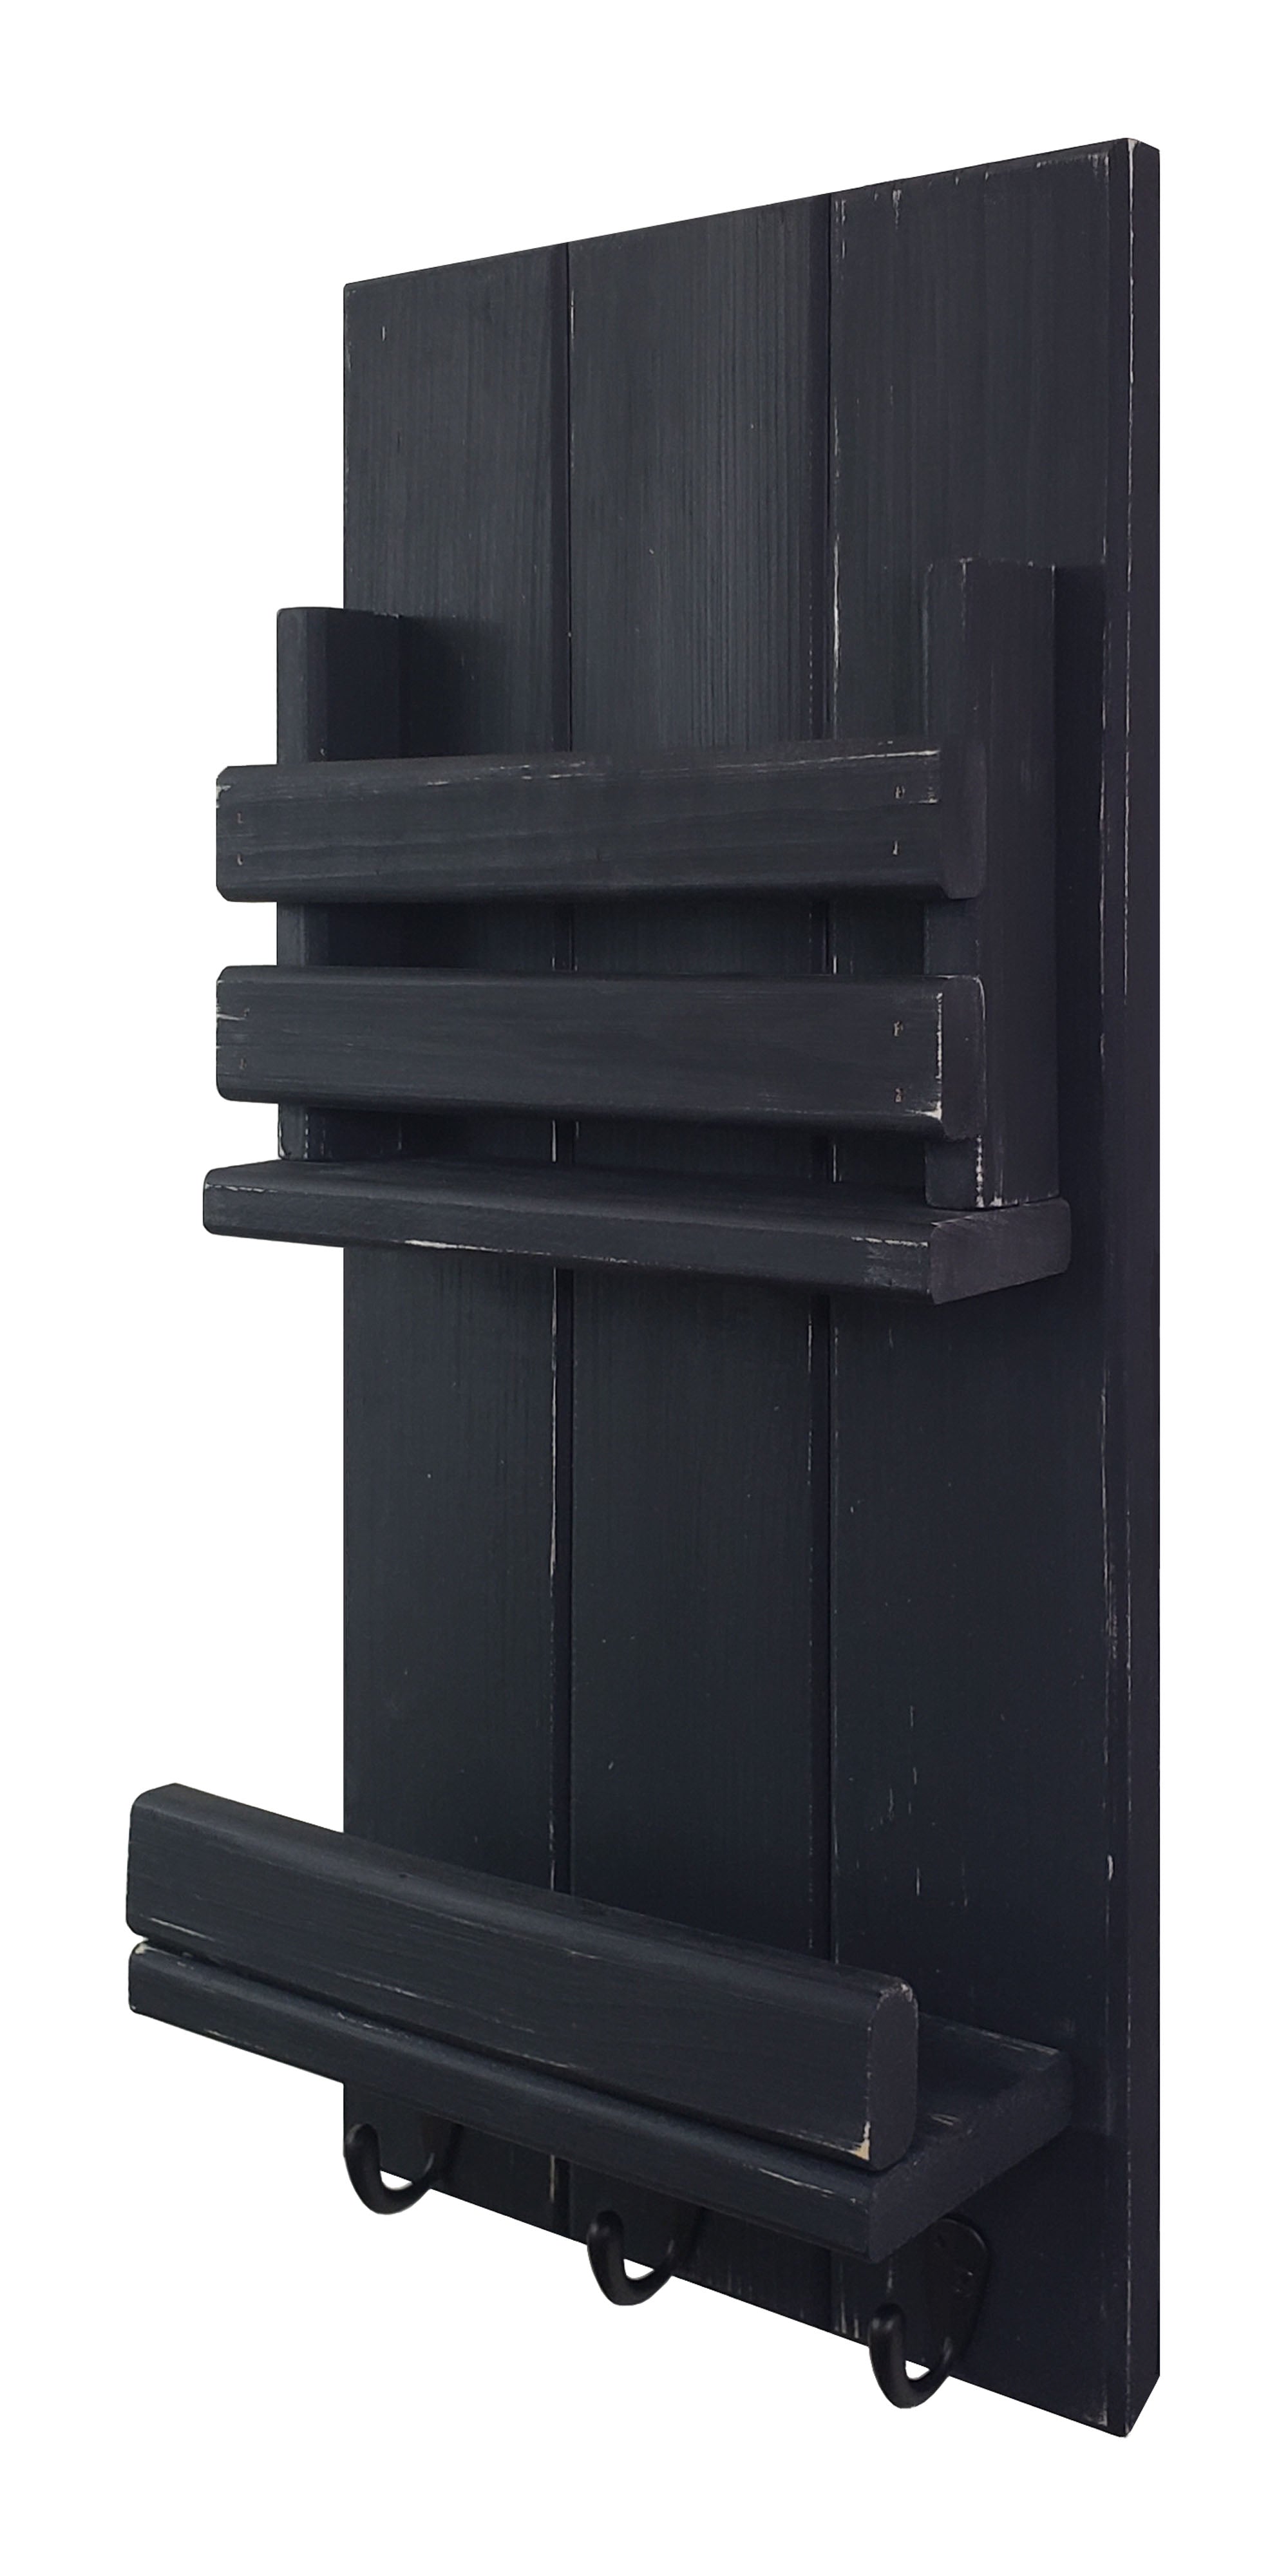 Bradford Vertical Wall Organizer, 20 Paint Colors, Shown in Kettle Black